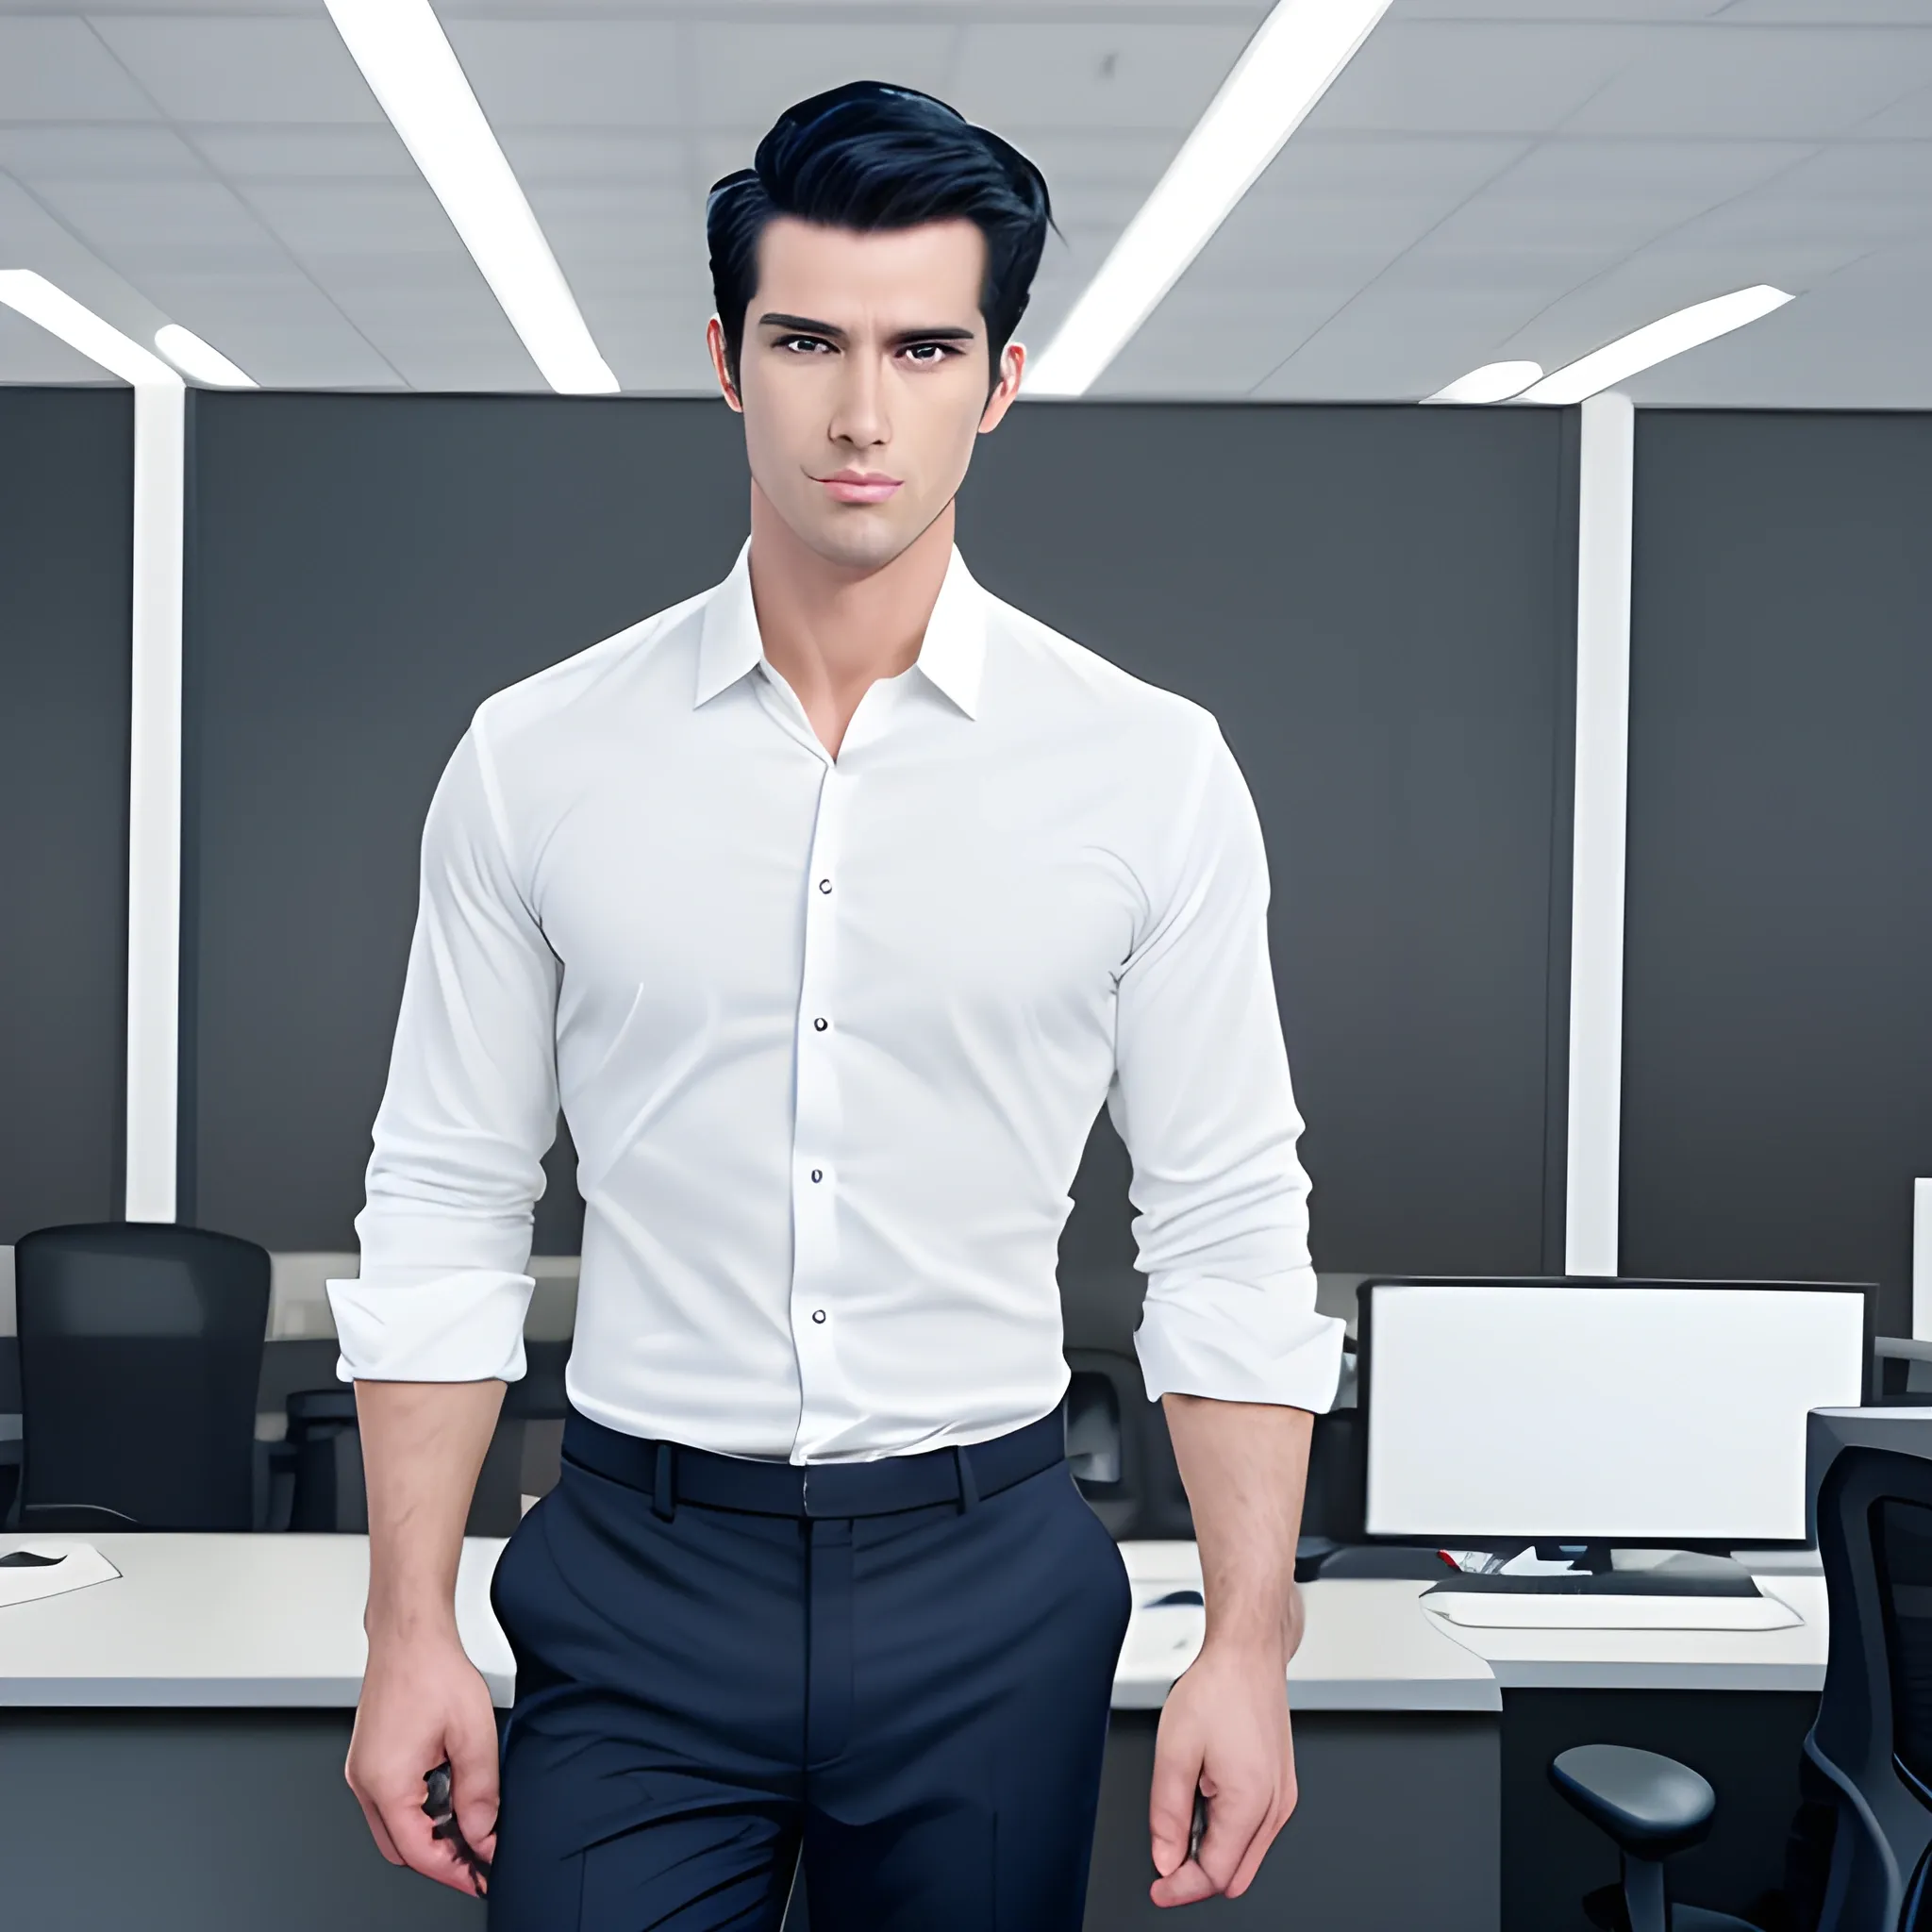 Looking Trendy. Well Groomed Hairstyle. Male Beauty and Fashion Look. Formal  Office Costume for Bearded Guy Stock Image - Image of boss, formal:  215044153